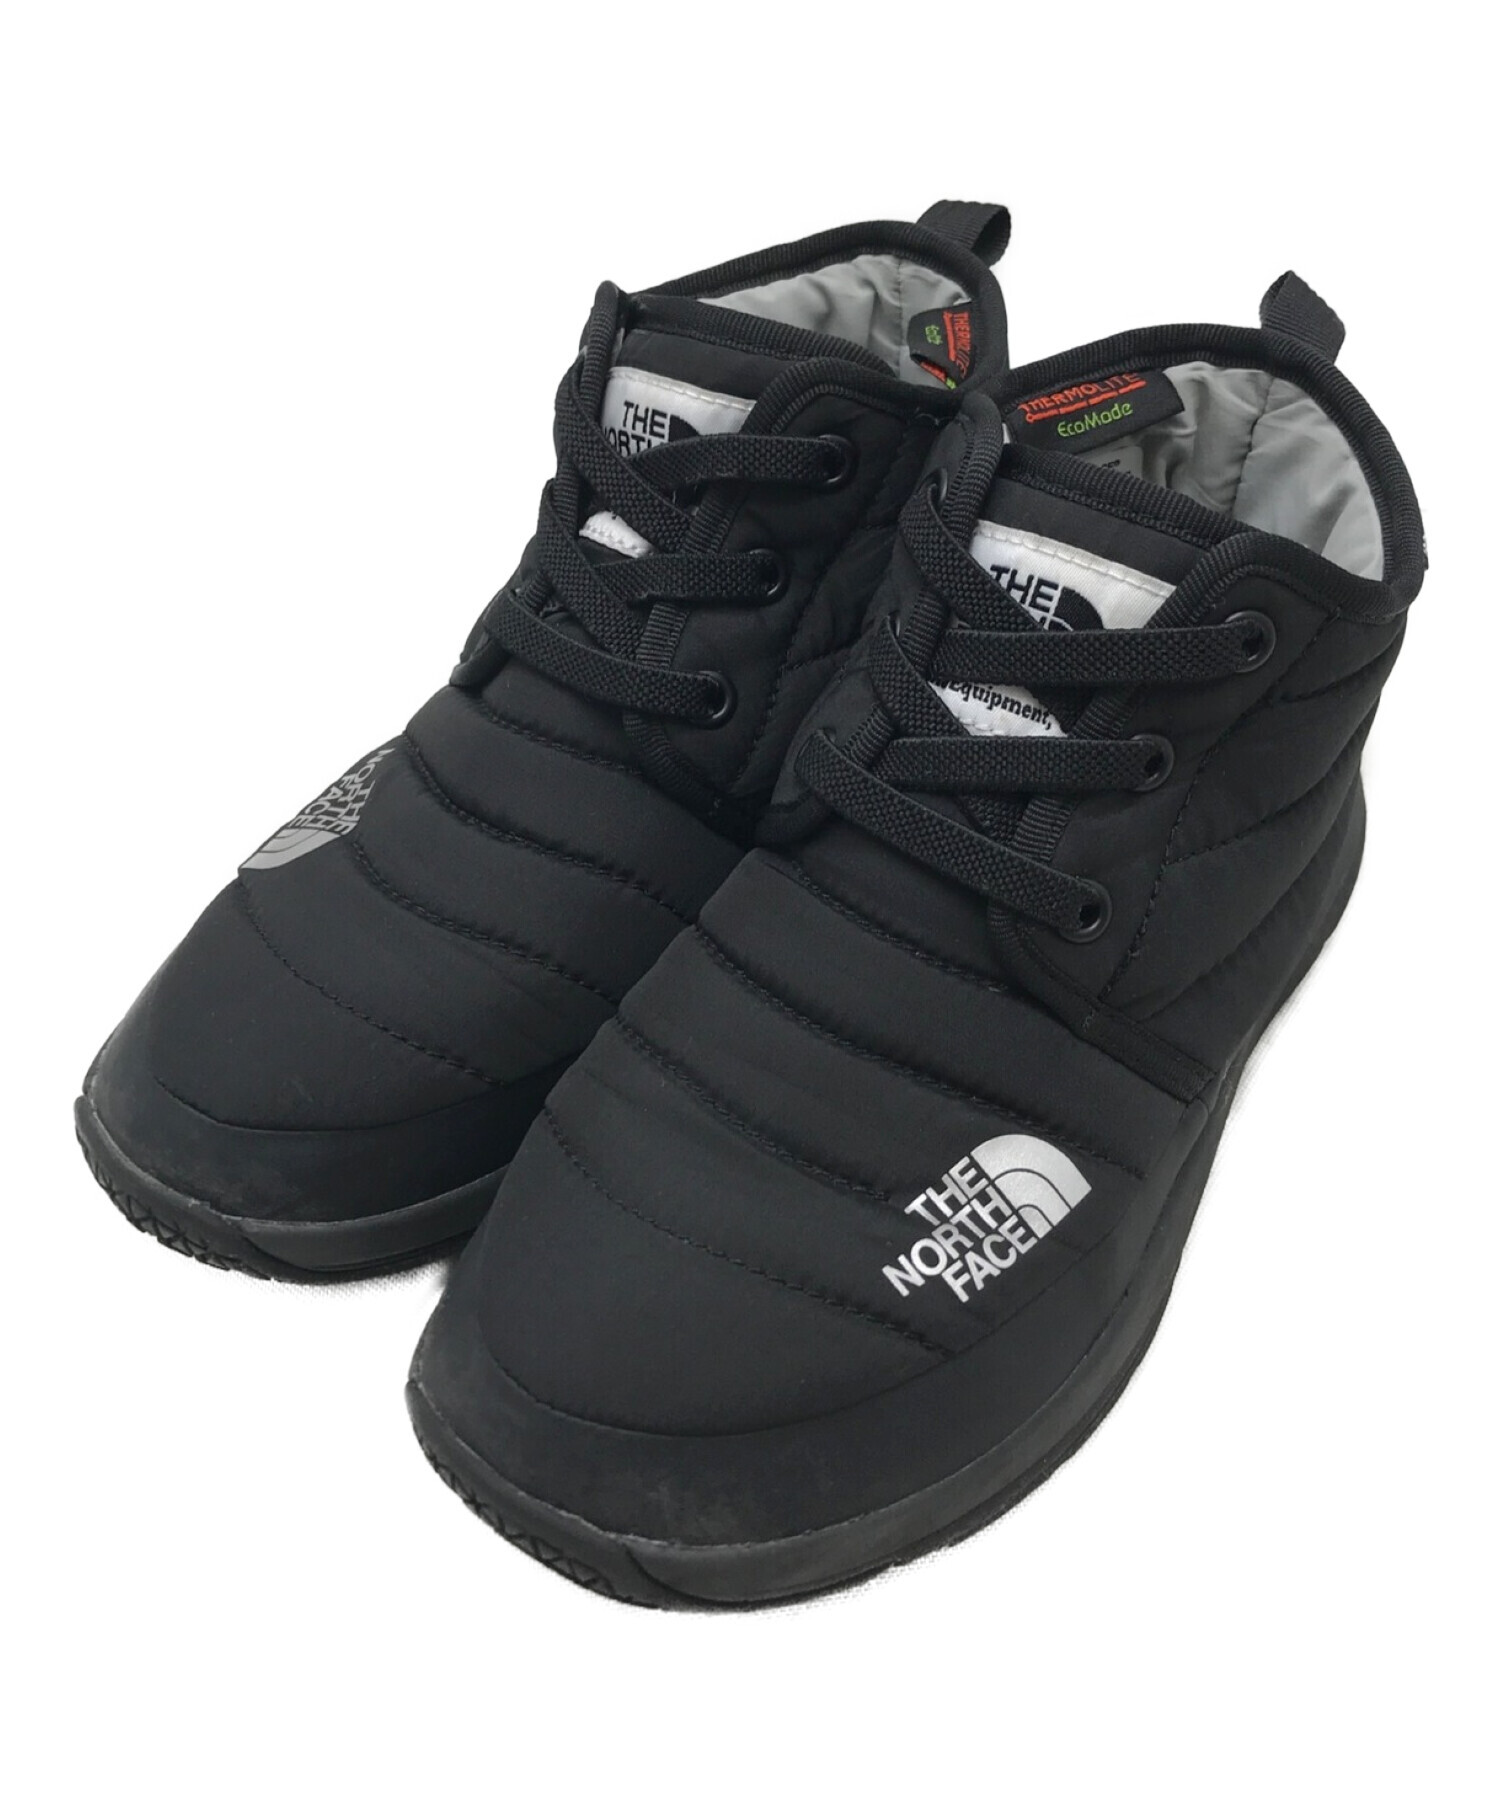 THE NORTH FACE NSE TRACTION LITE V WP